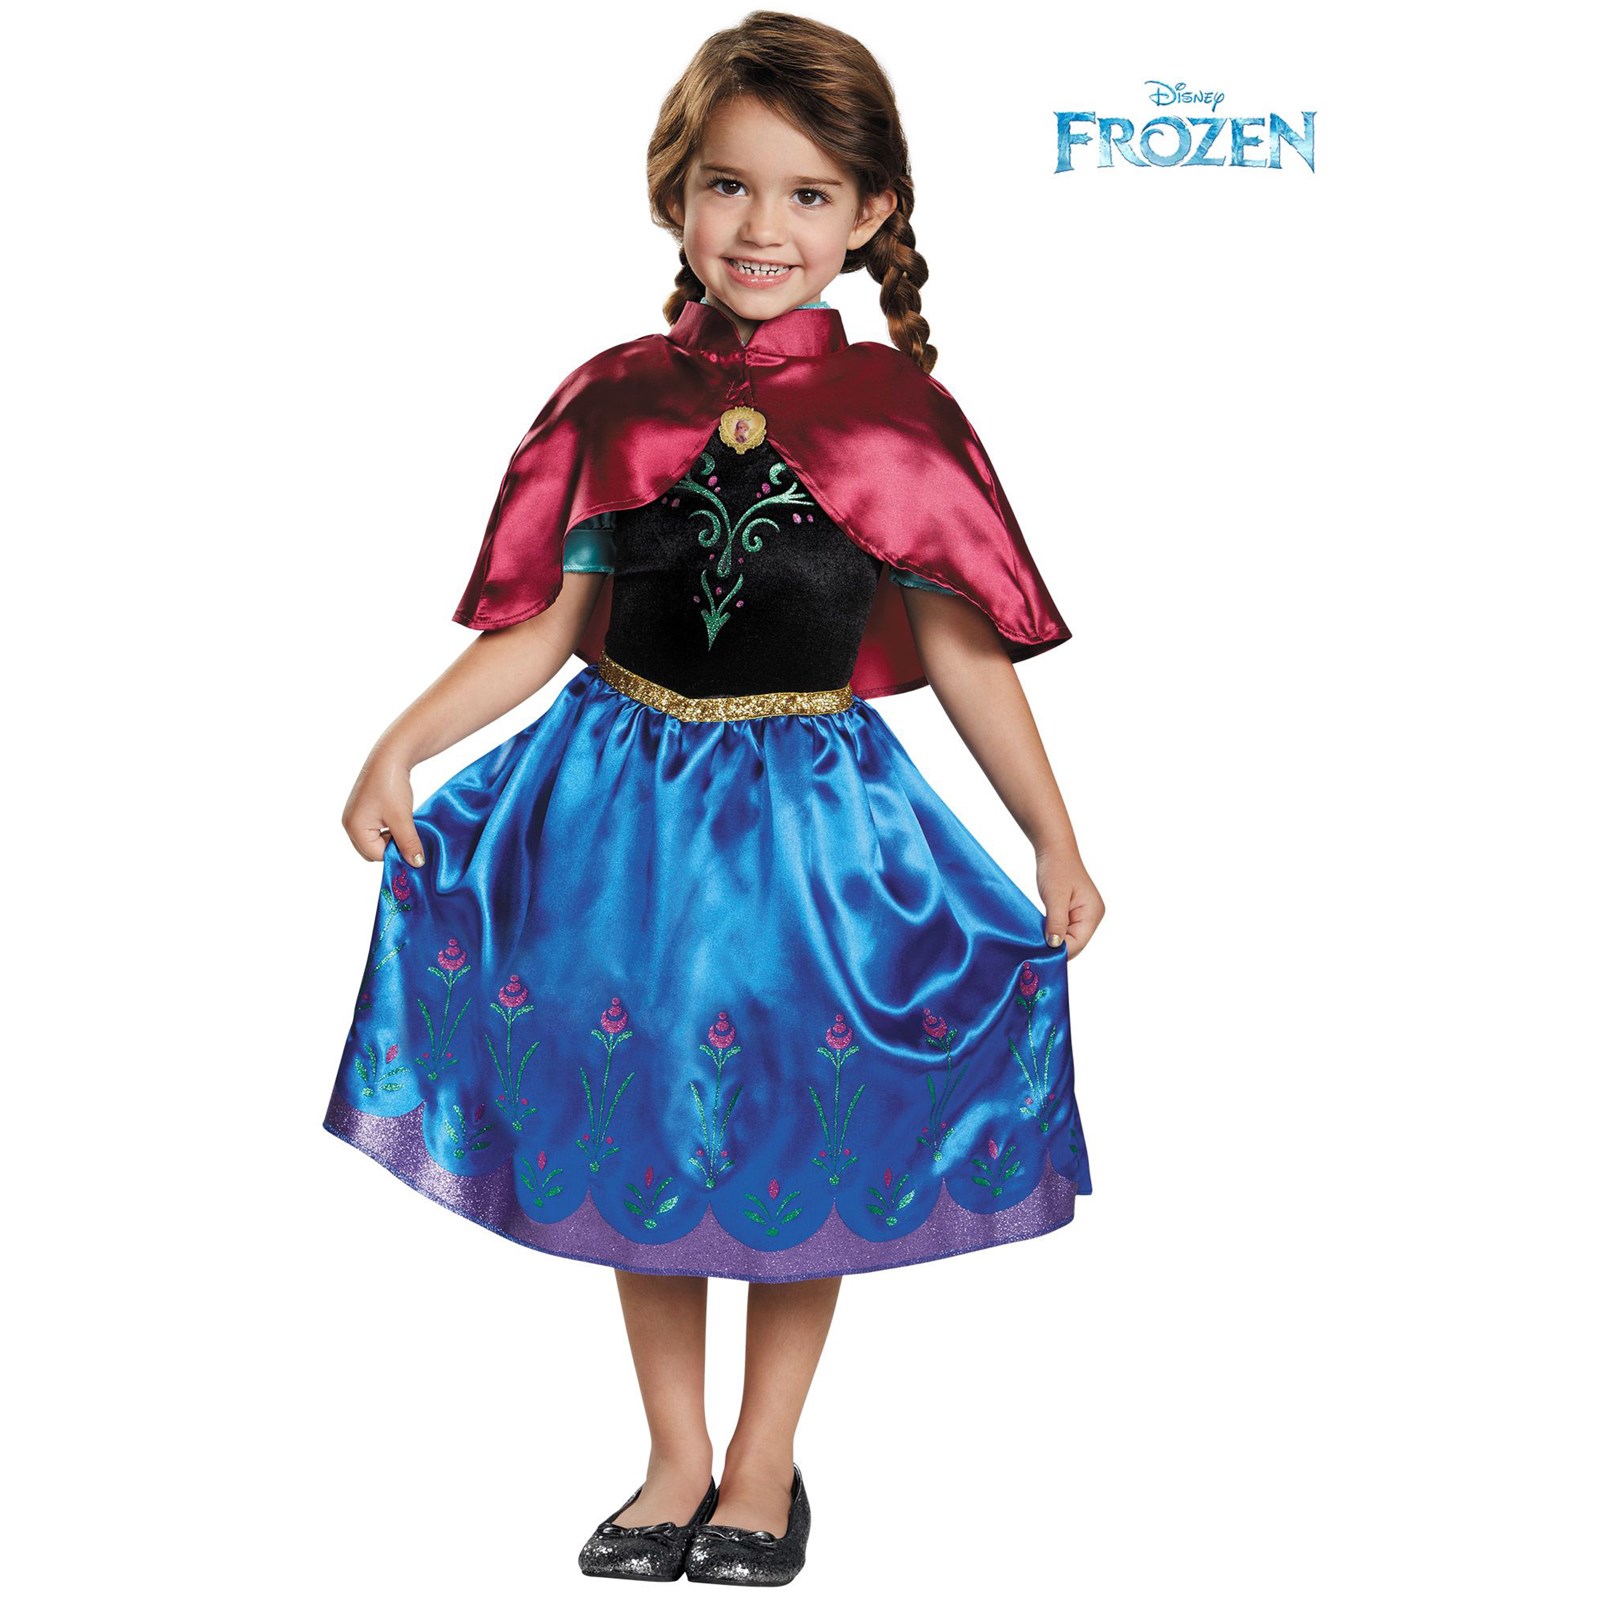 Disney Frozen Traveling Anna Classic Toddler Costume - image 1 of 2